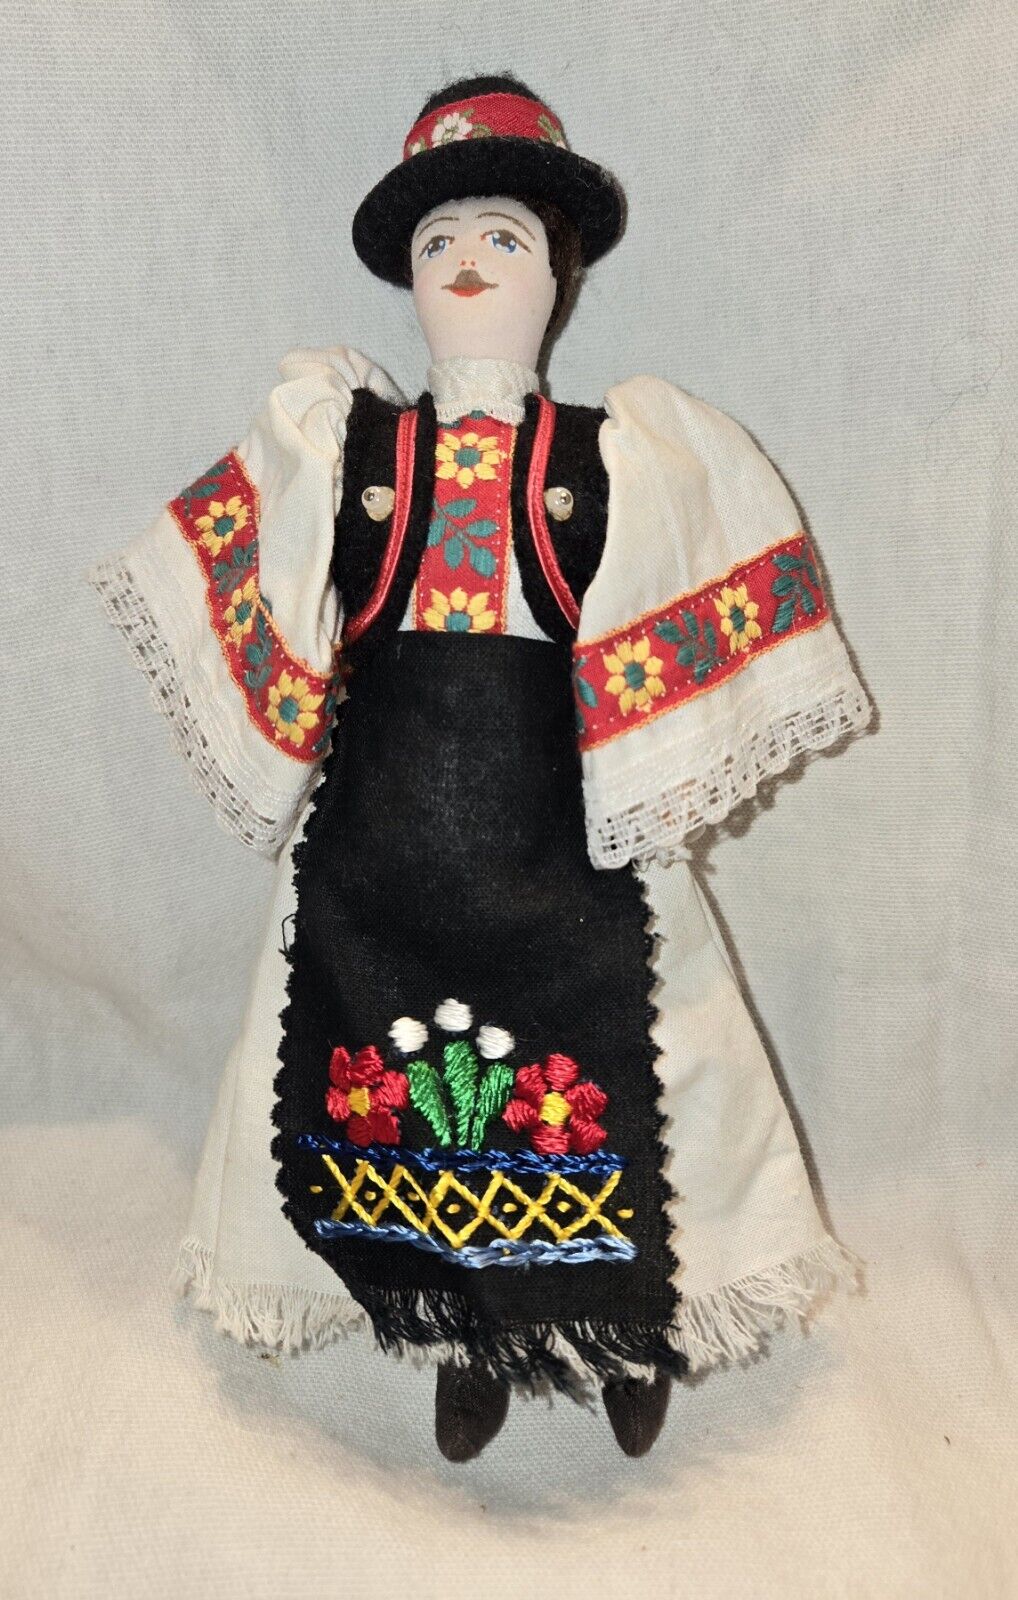 RARE MATYO Mezokovesd Vintage Hungarian Male doll w/ Traditional Embroidery ￼